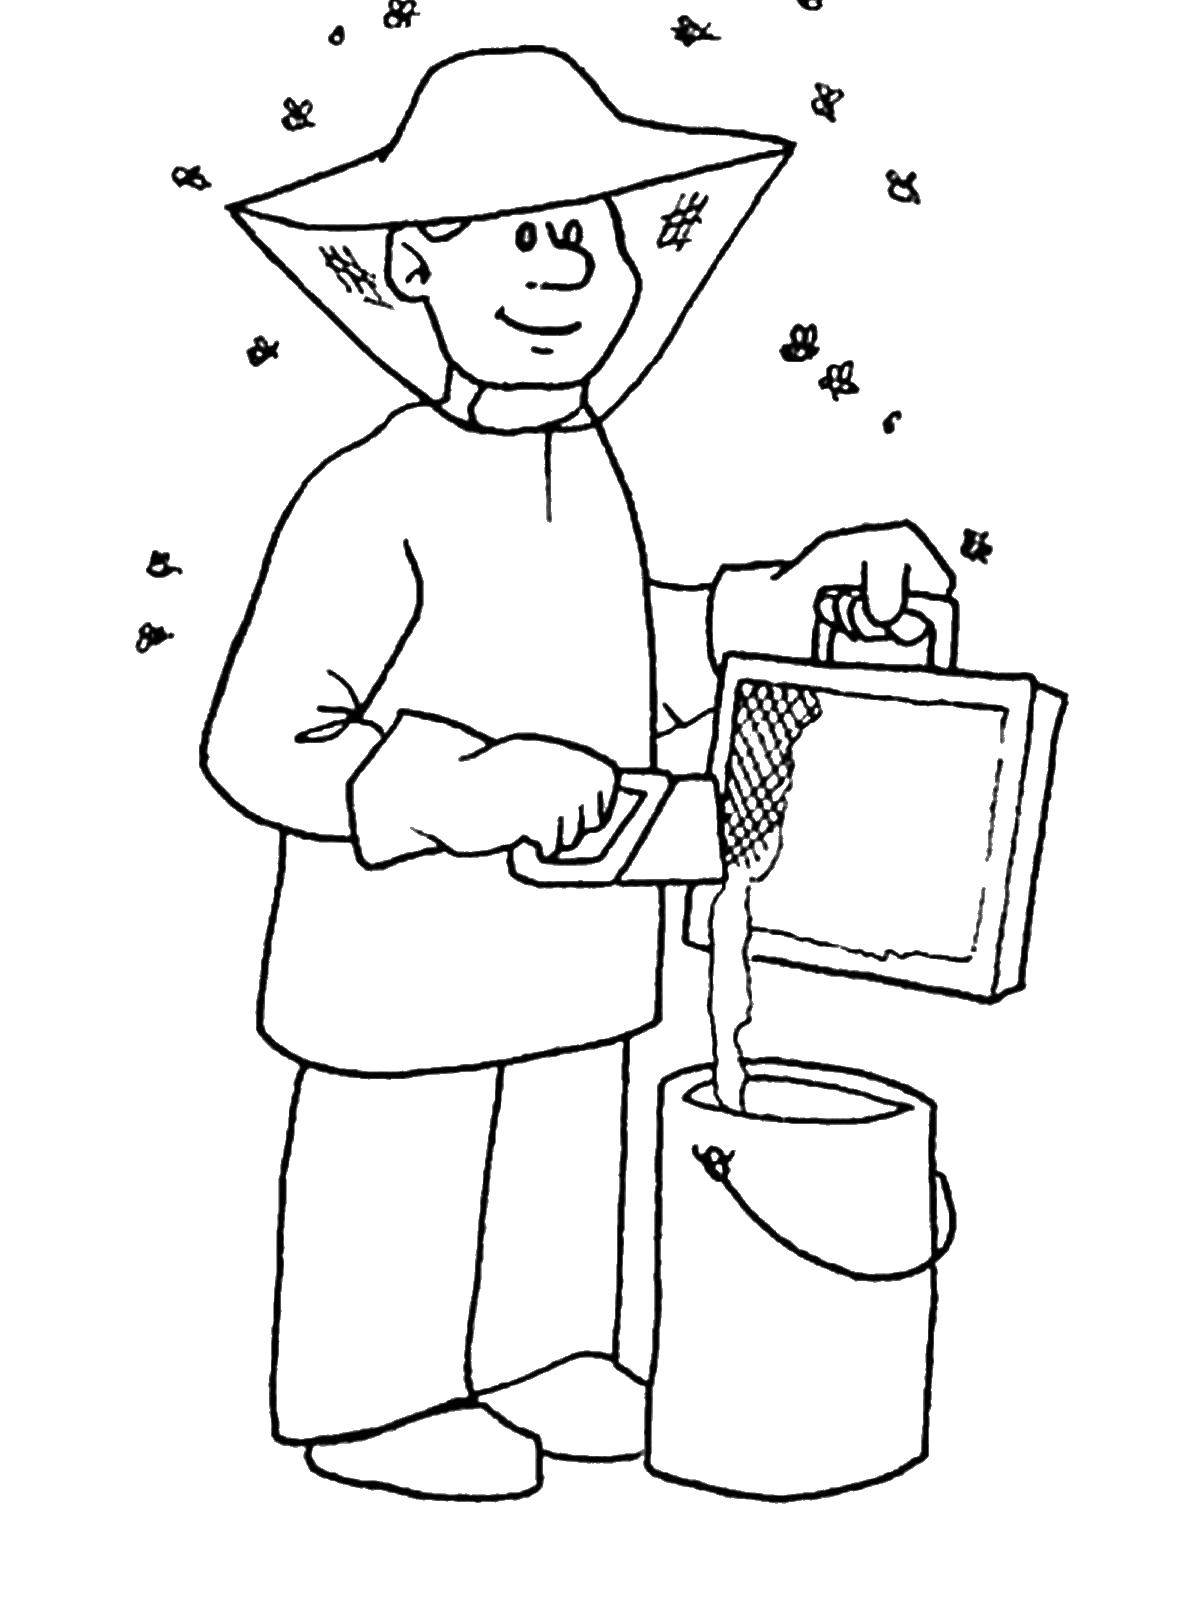 Coloring The beekeeper. Category a profession. Tags:  profession, beekeeper, bees.